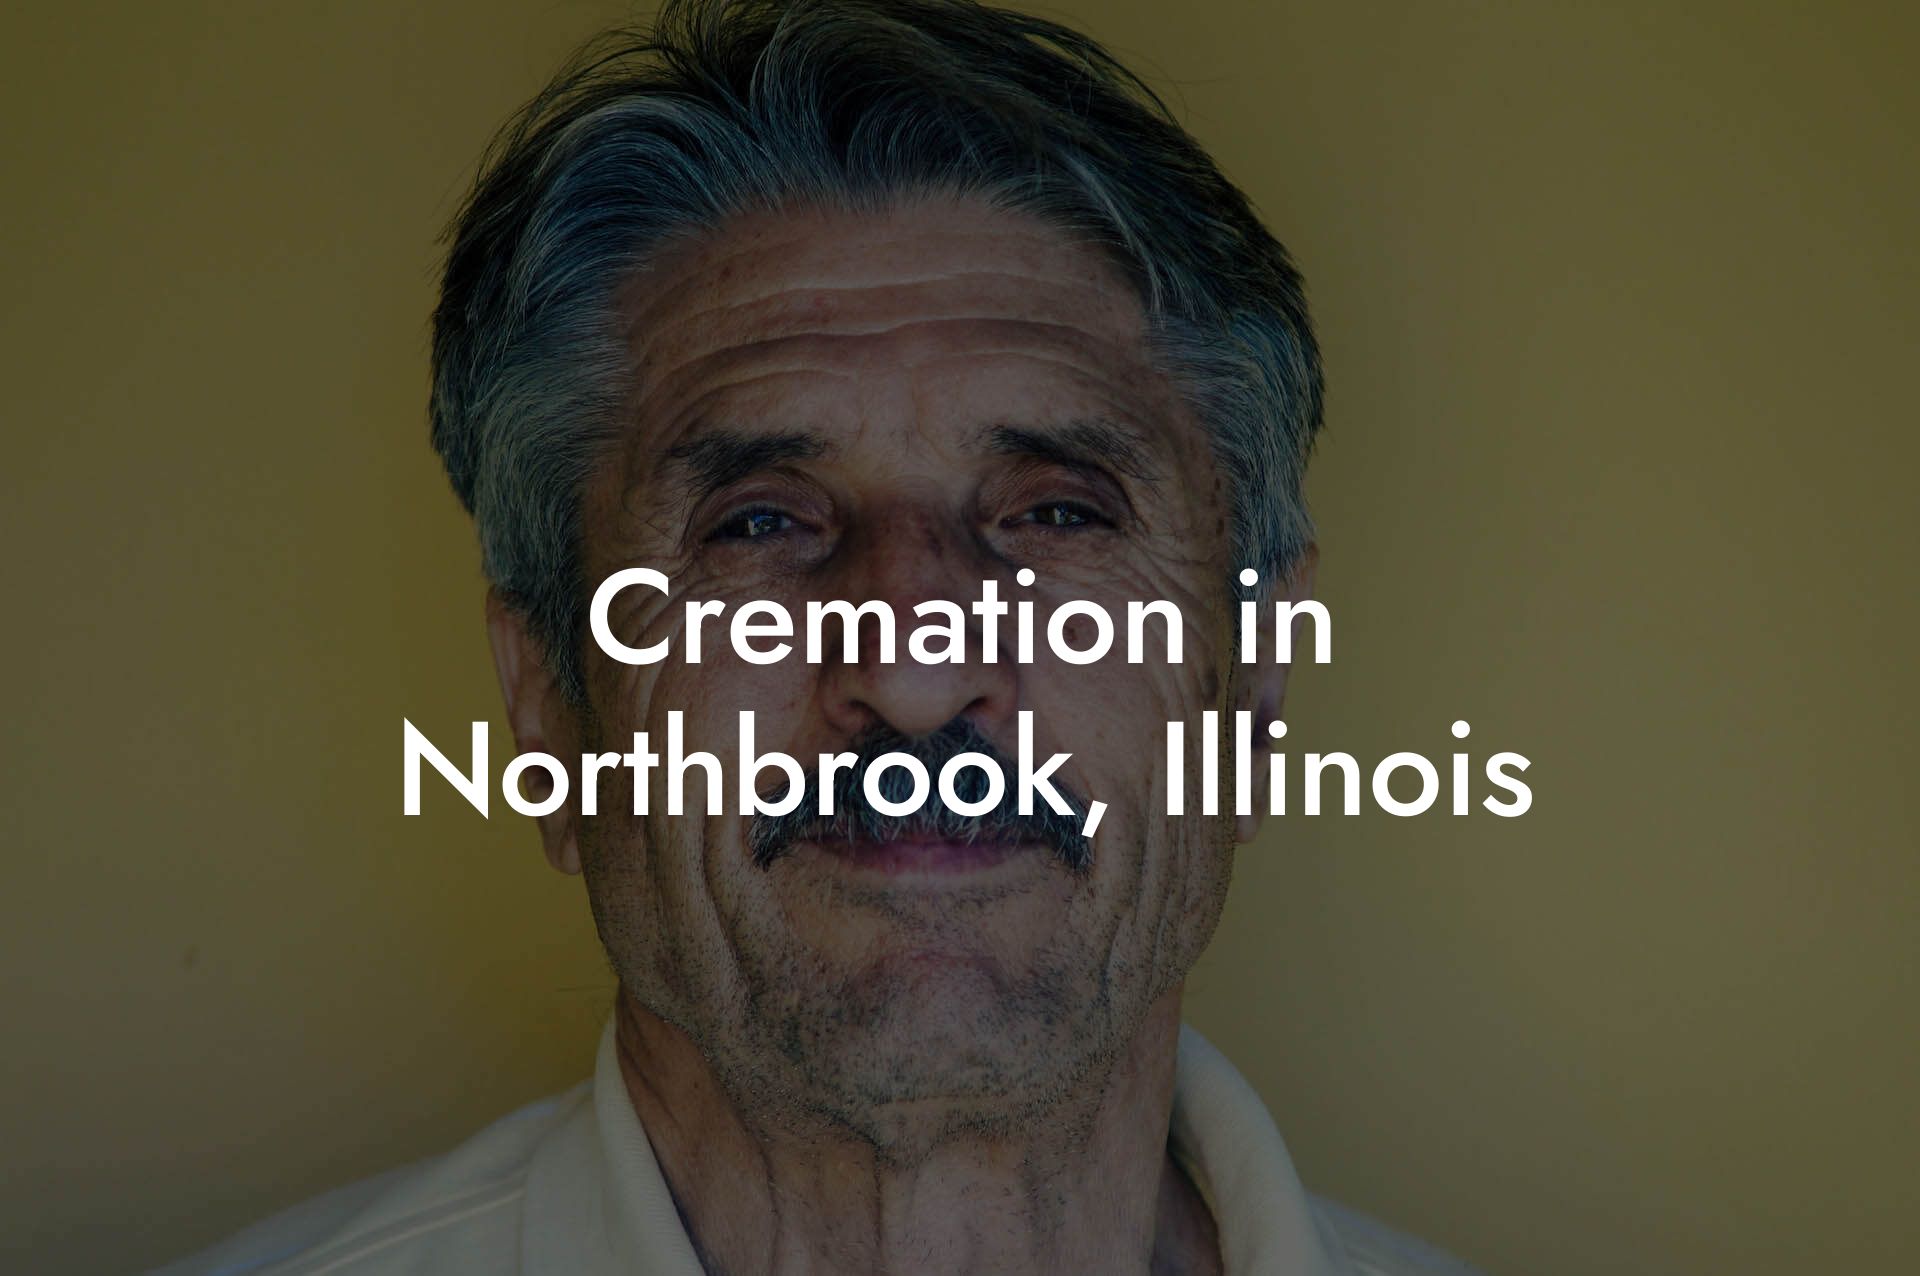 Cremation in Northbrook, Illinois